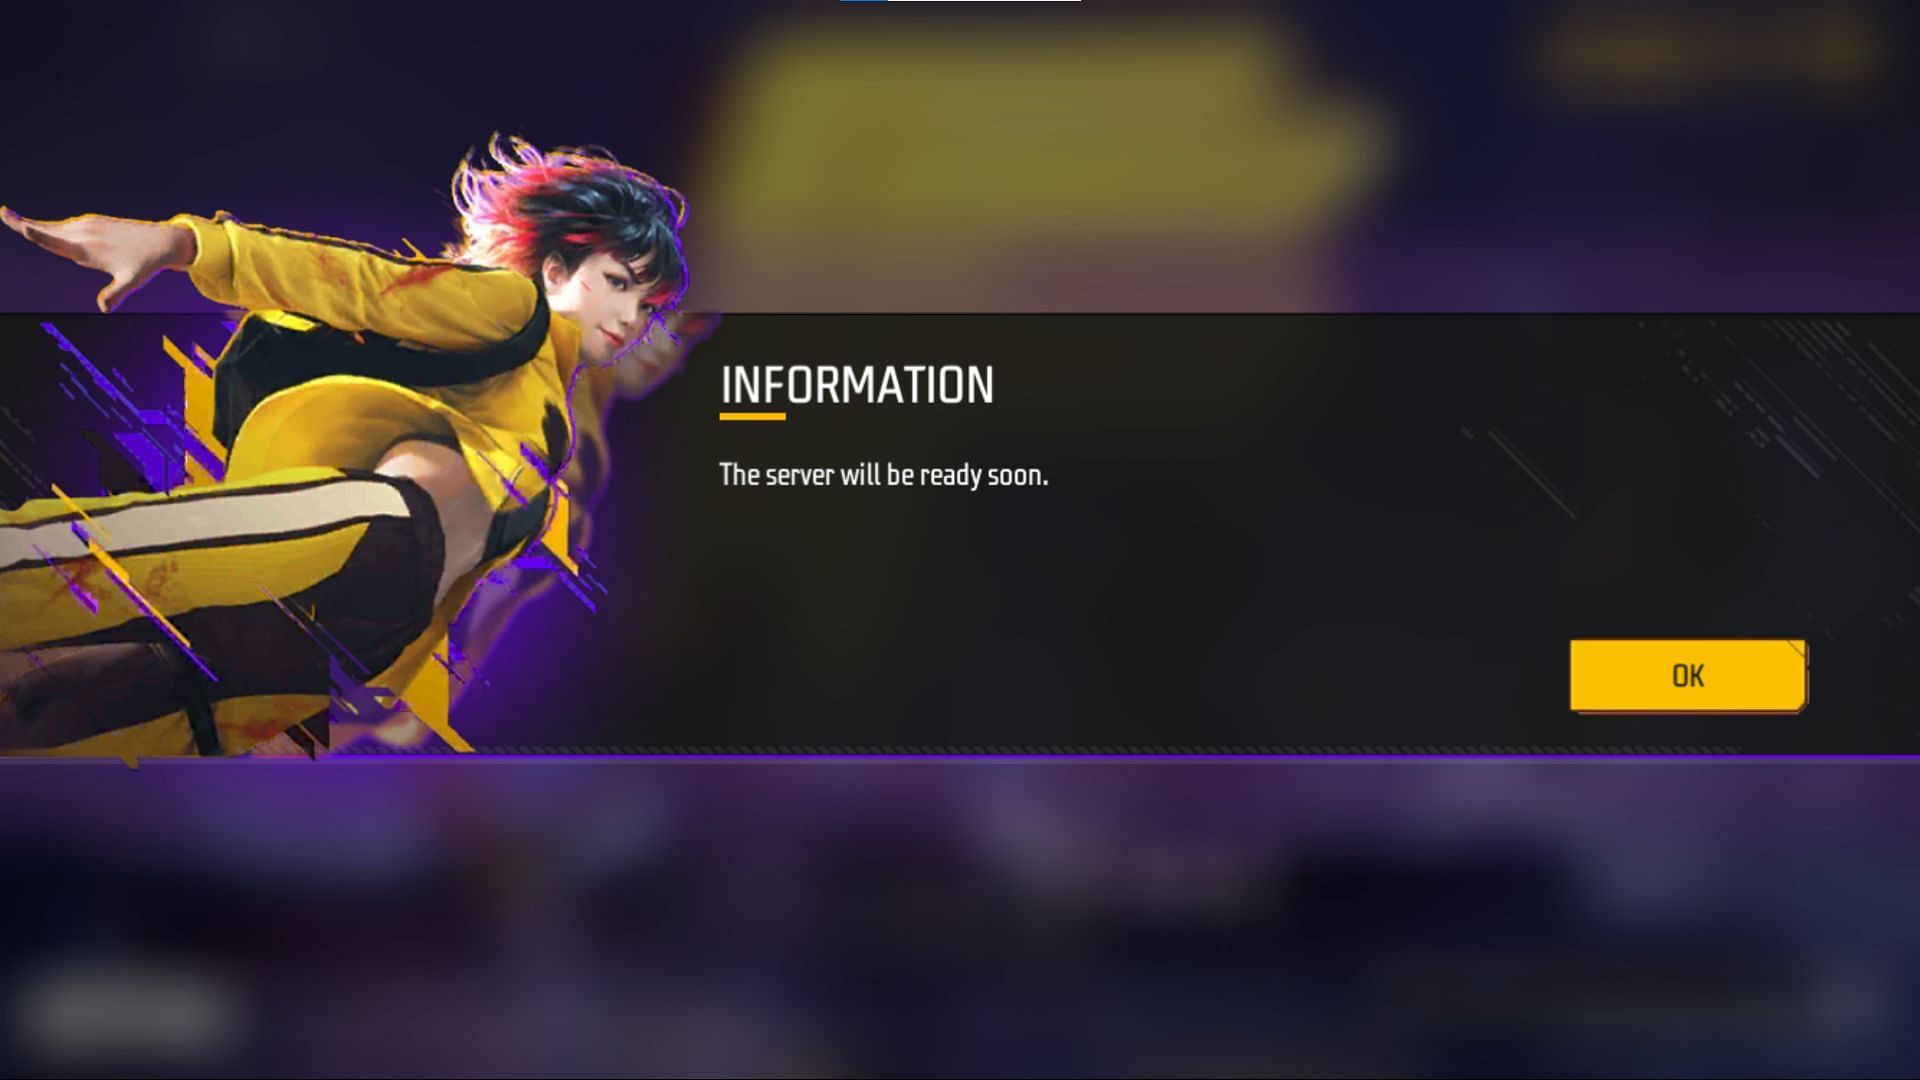 Users will receive this error message (Image via Garena)